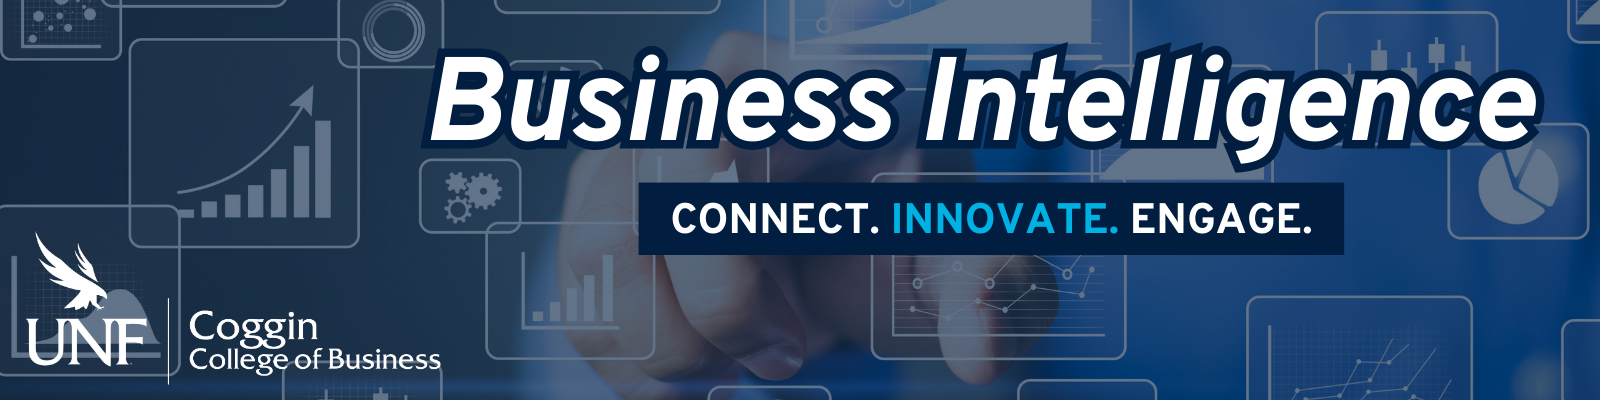 UNF Coggin College of Business logo Business Intelligence Connect  Innovate Engage